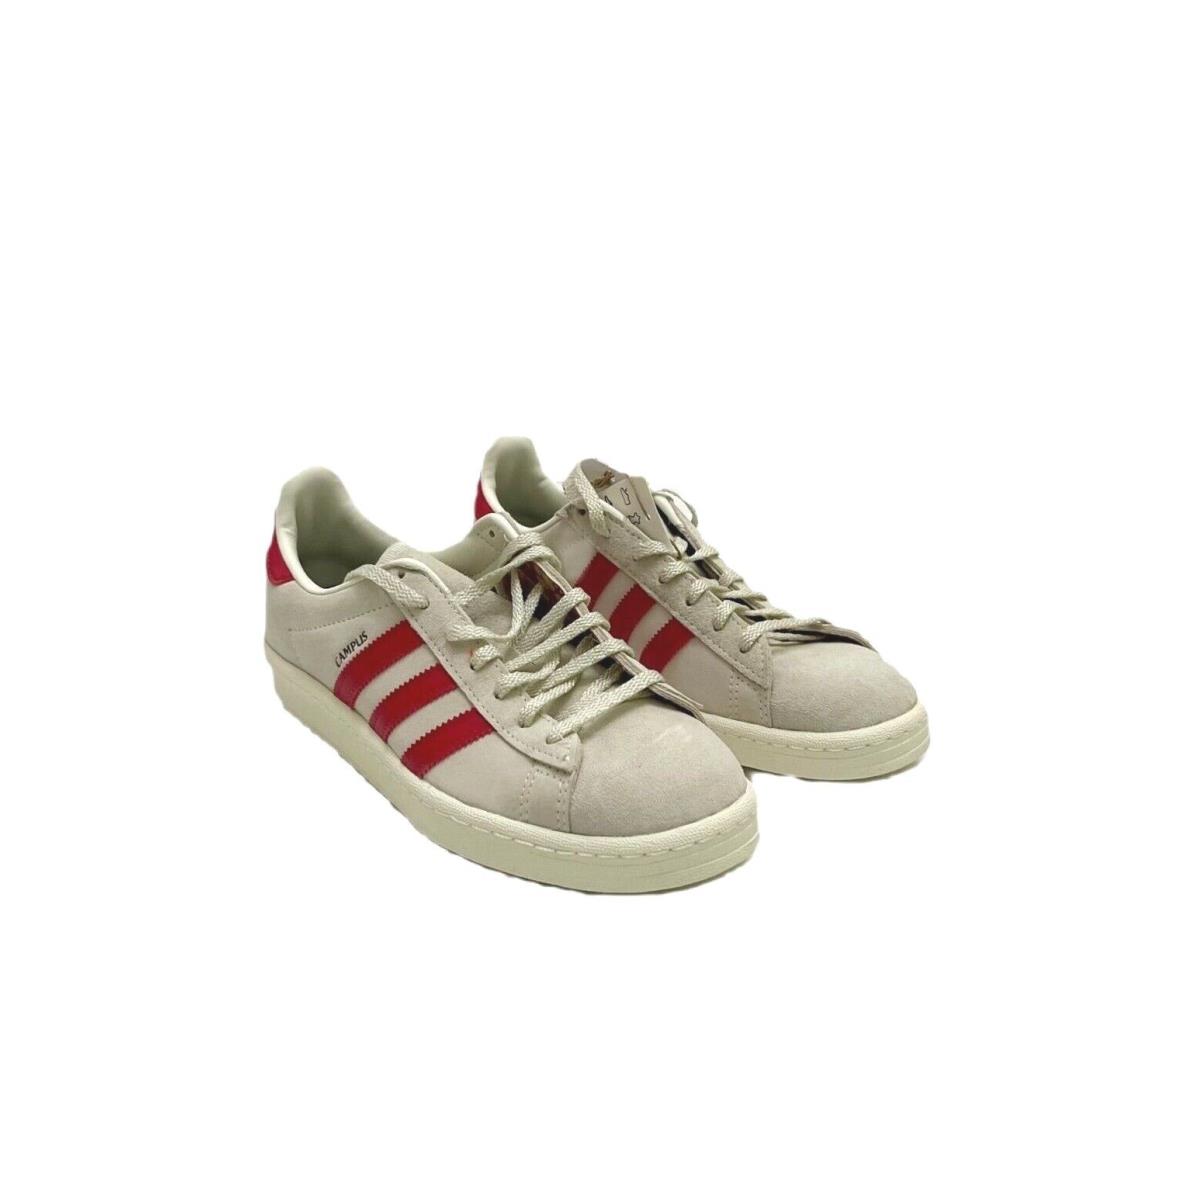 Adidas Men`s Campus 80`s Casual/activewear Shoes - Off White/Collegiate Red/Carbon